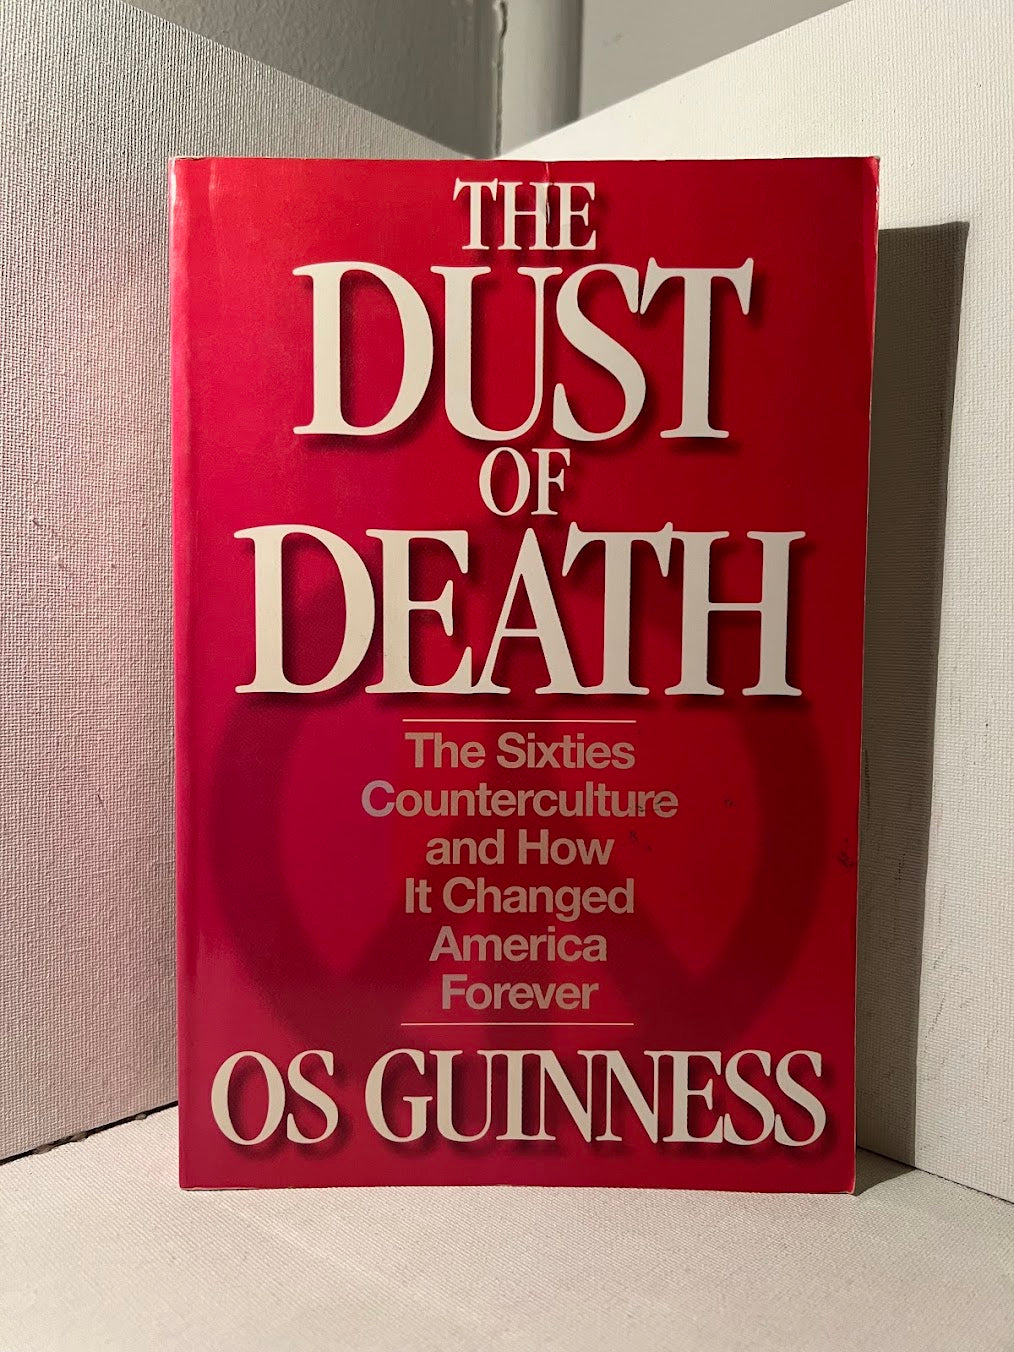 The Dust of Death by Os Guinness